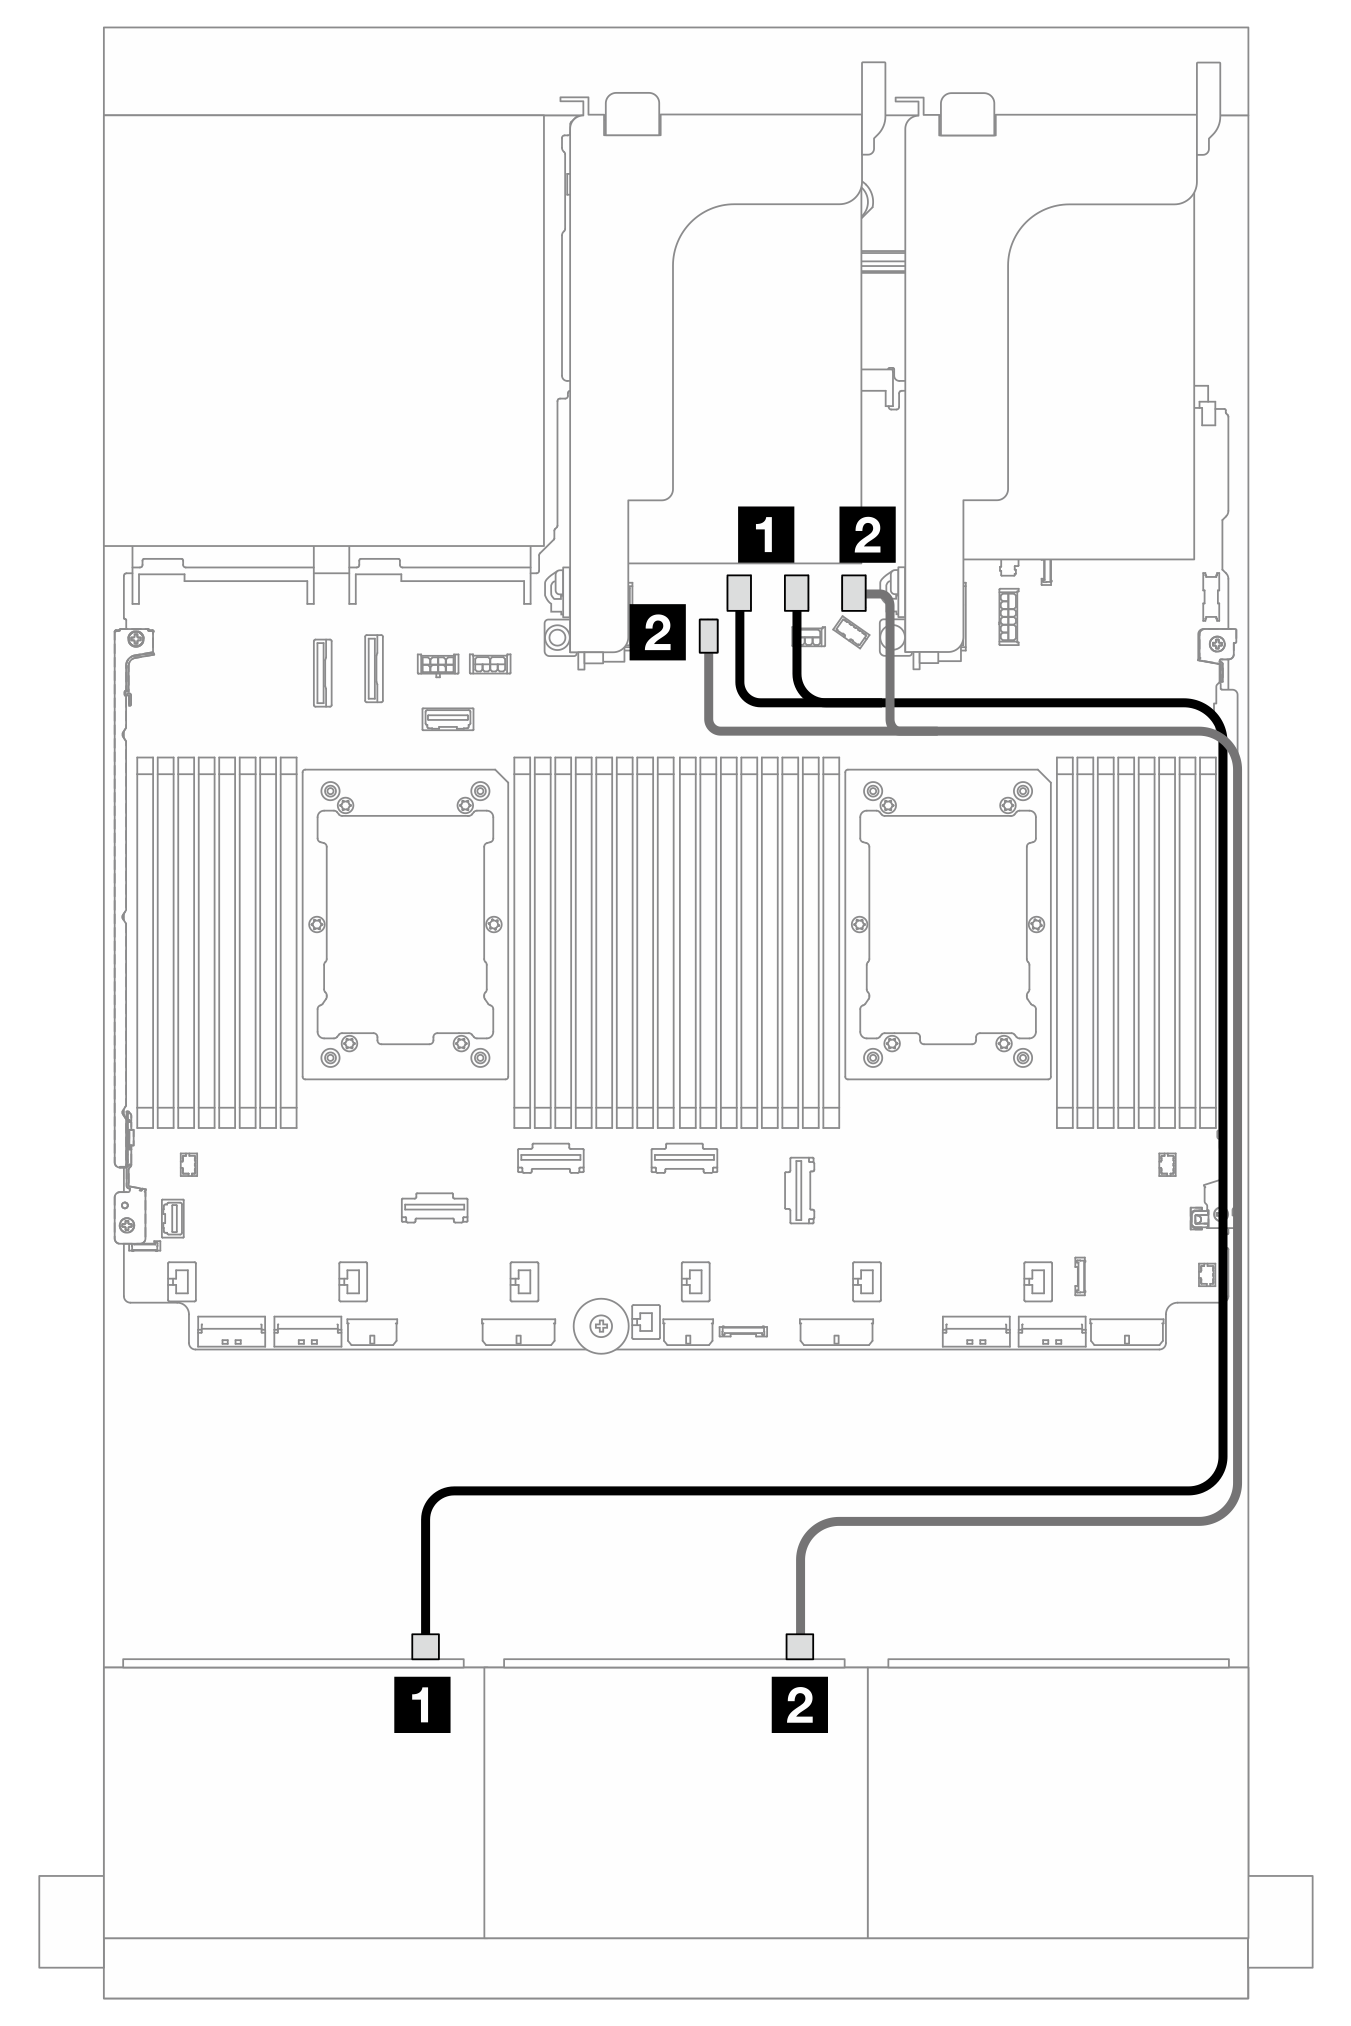 SAS/SATA cable routing to onboard connectors